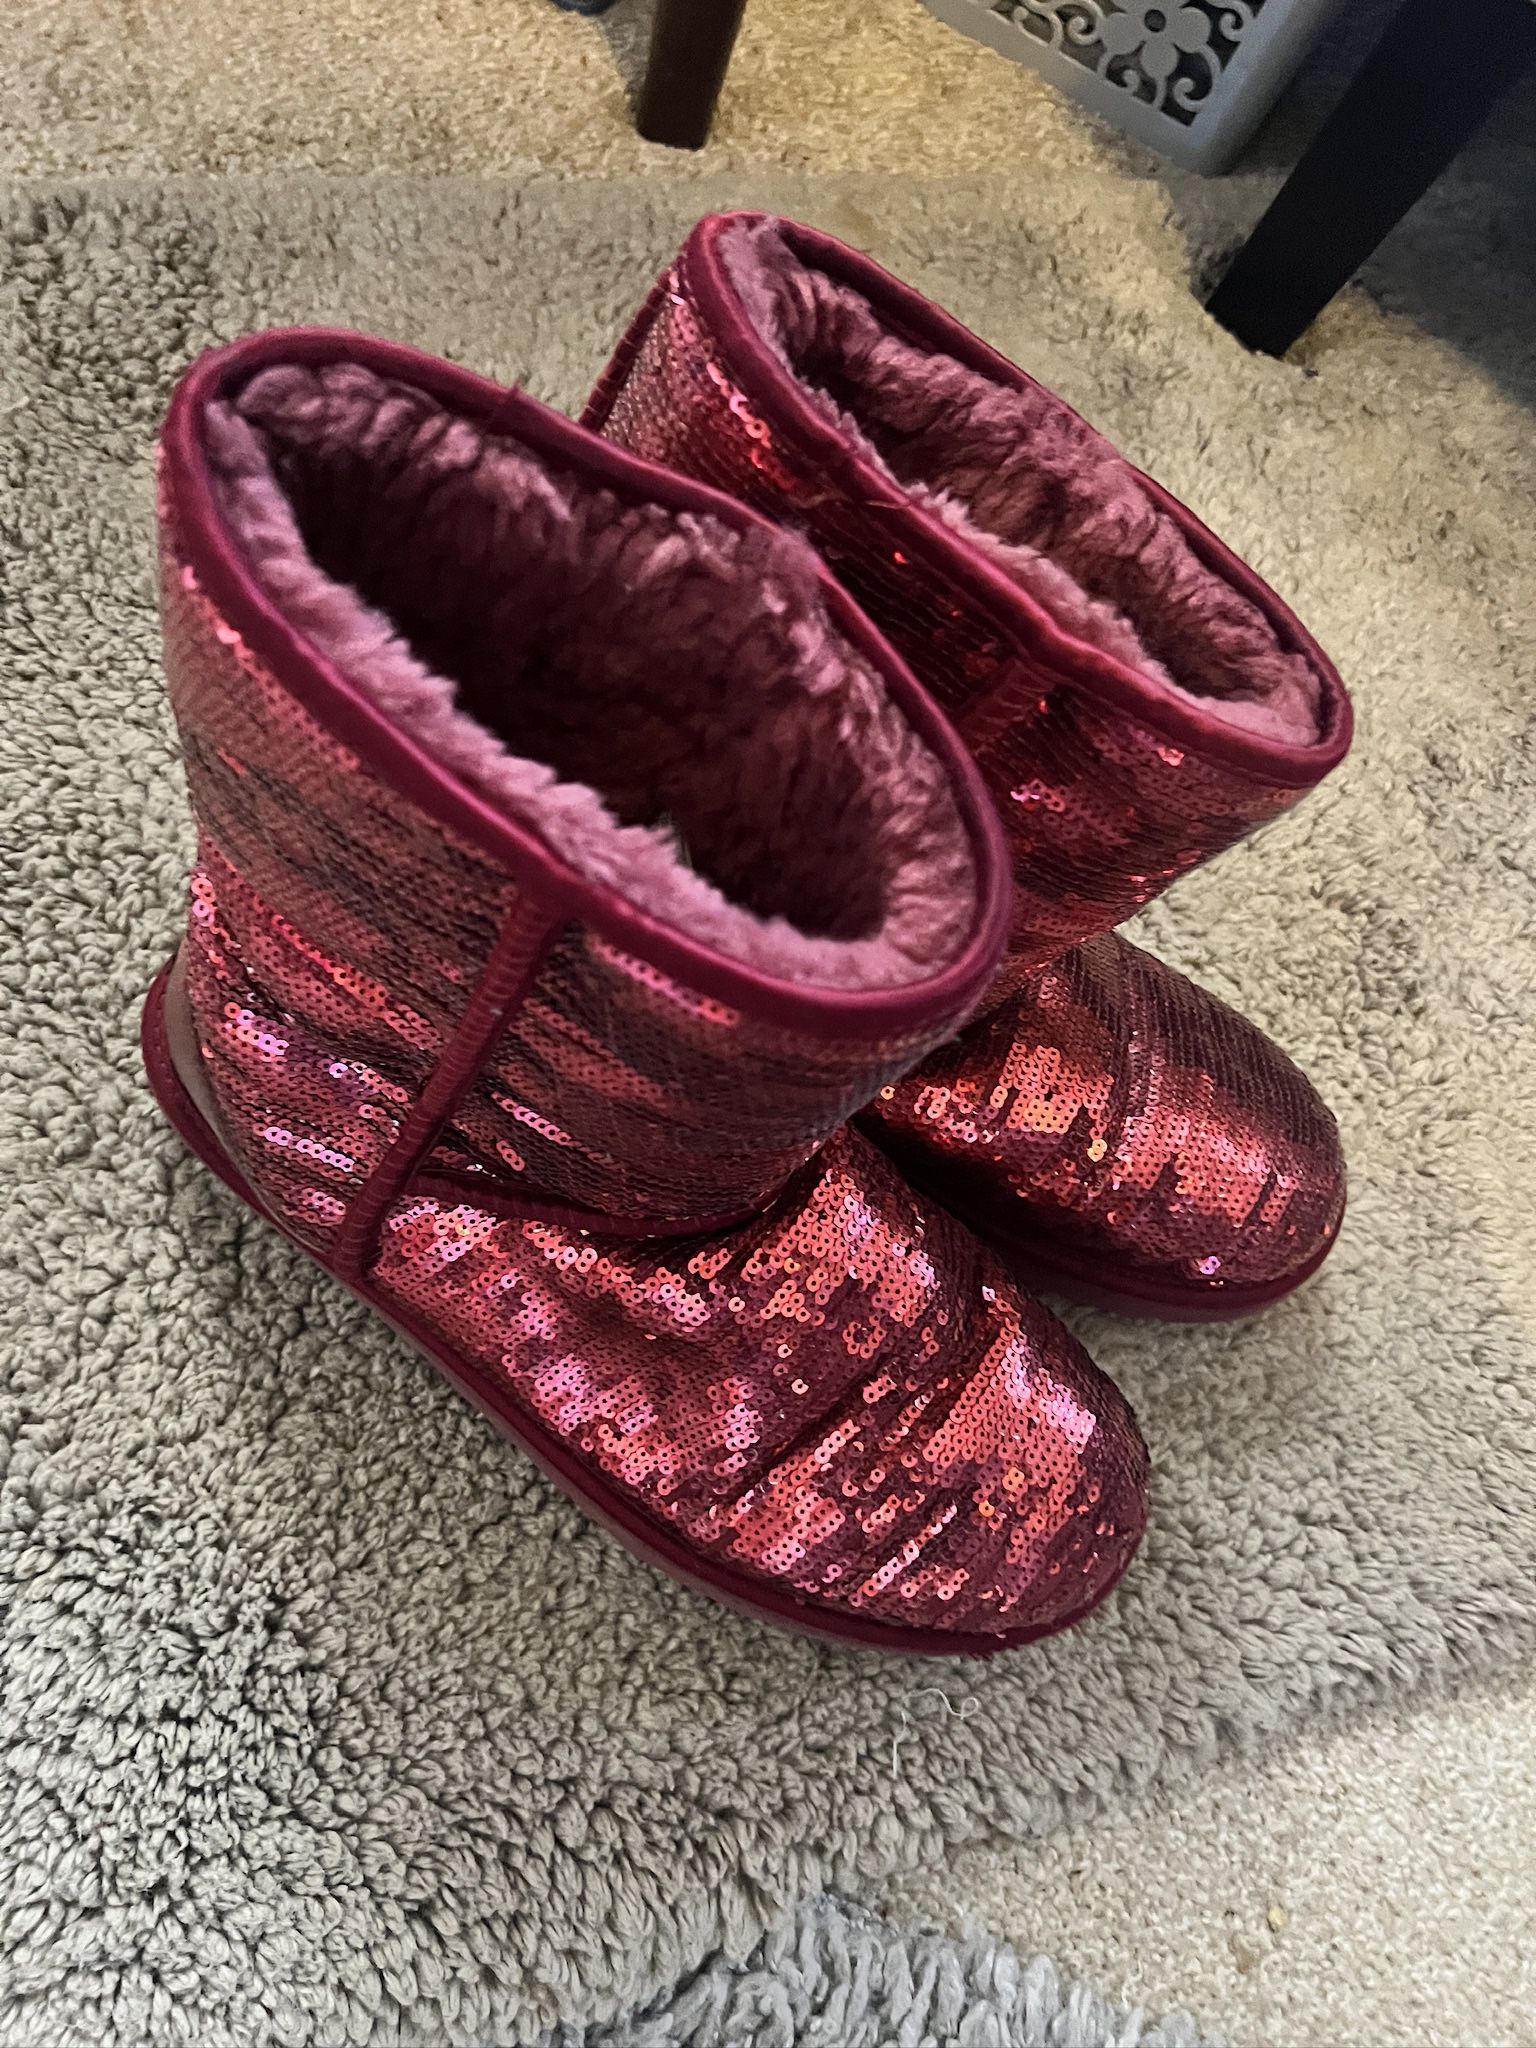 Shiny Red Ugg Women’s Size 11 Boots 